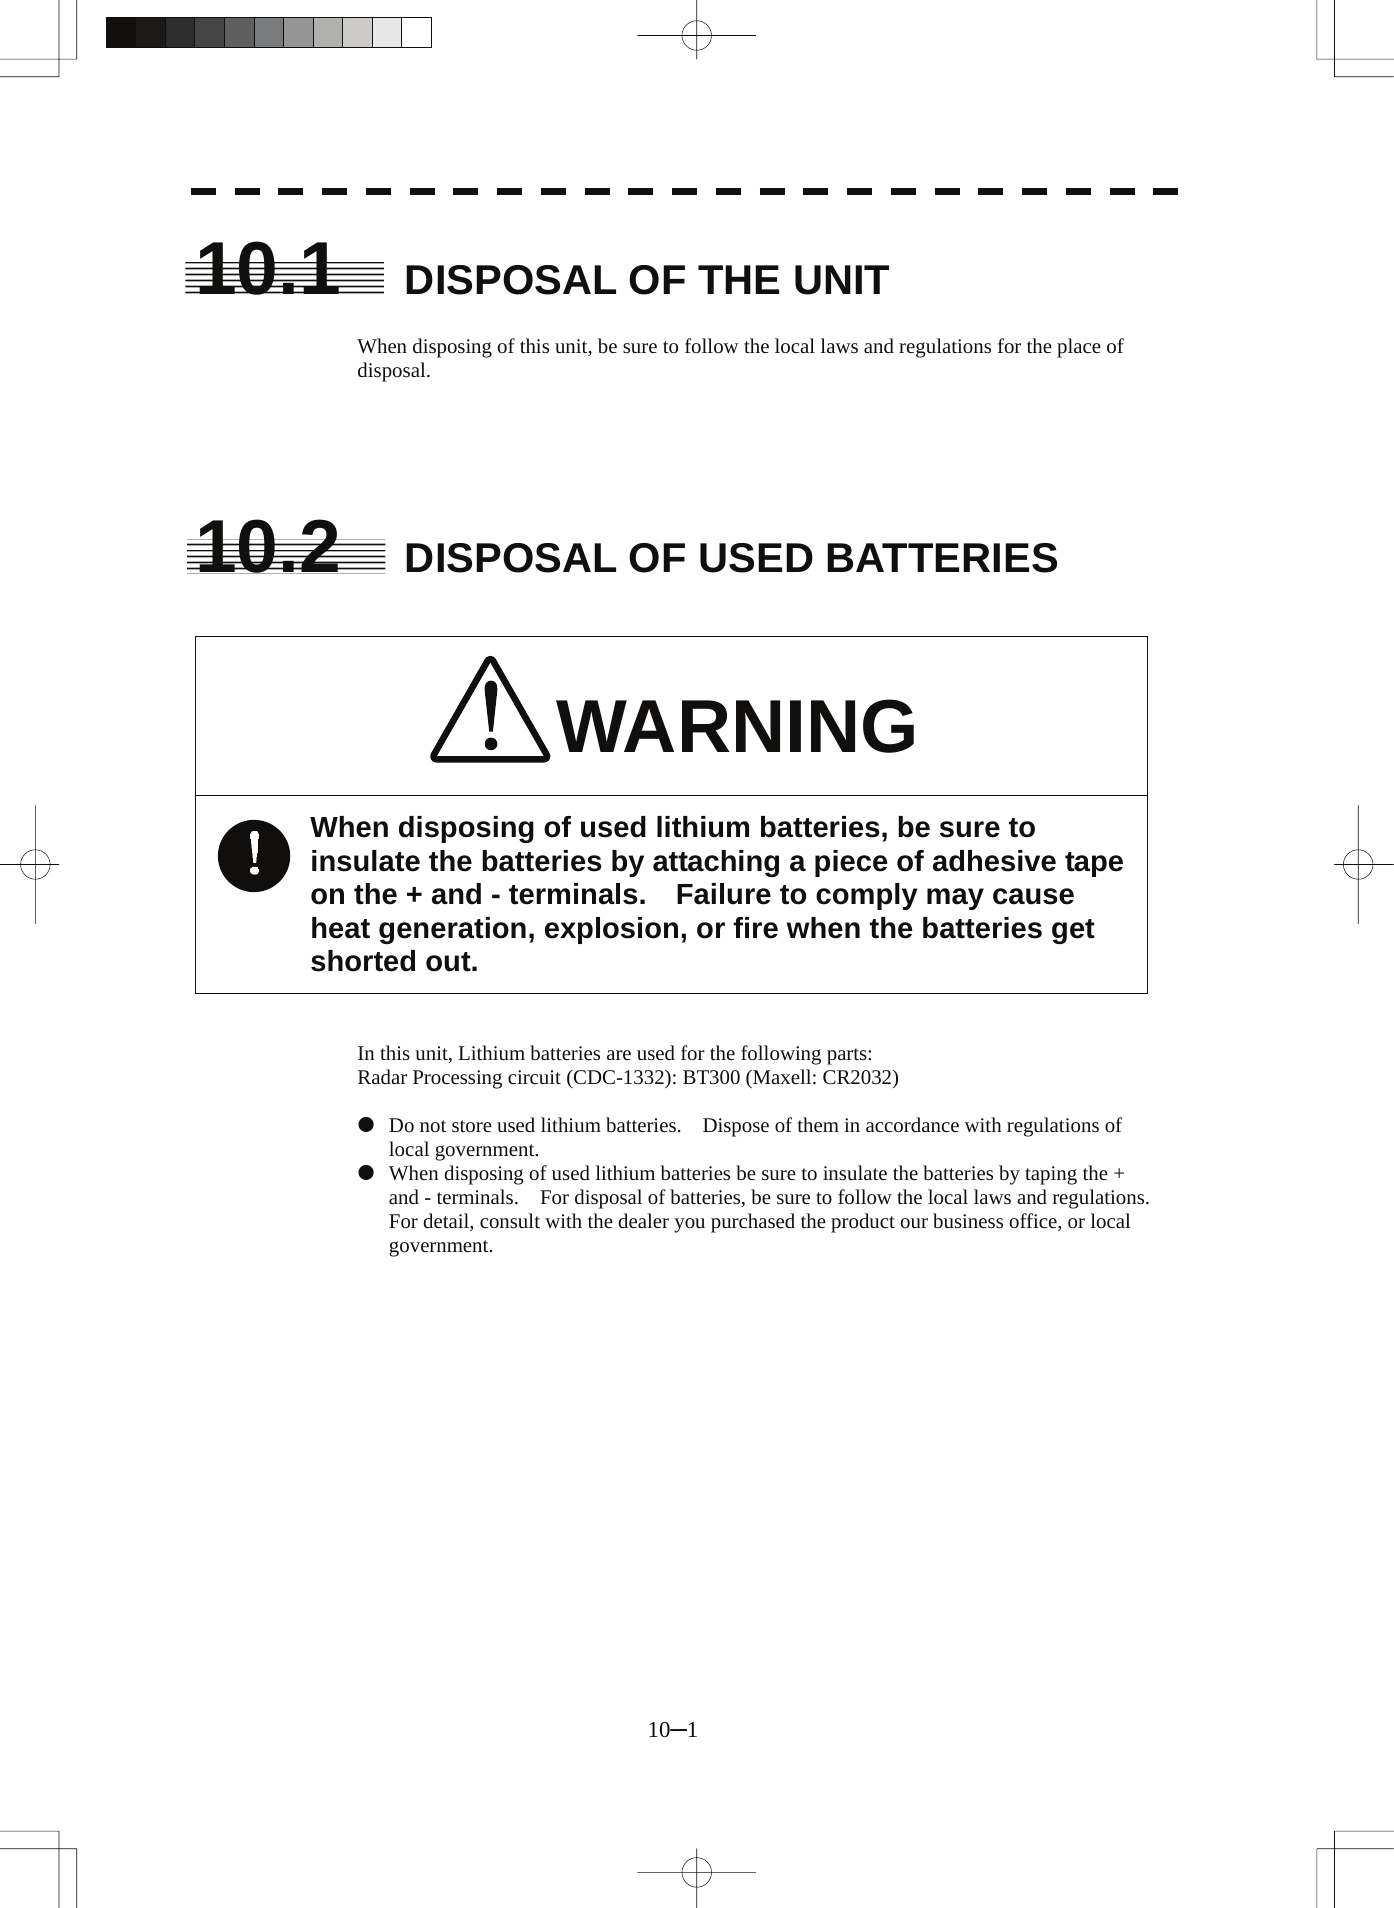  10─1 10.1  DISPOSAL OF THE UNIT  When disposing of this unit, be sure to follow the local laws and regulations for the place of disposal.      10.2  DISPOSAL OF USED BATTERIES   WARNING When disposing of used lithium batteries, be sure to insulate the batteries by attaching a piece of adhesive tape on the + and - terminals.    Failure to comply may cause heat generation, explosion, or fire when the batteries get shorted out.   In this unit, Lithium batteries are used for the following parts: Radar Processing circuit (CDC-1332): BT300 (Maxell: CR2032)  z  Do not store used lithium batteries.    Dispose of them in accordance with regulations of local government. z  When disposing of used lithium batteries be sure to insulate the batteries by taping the + and - terminals.    For disposal of batteries, be sure to follow the local laws and regulations. For detail, consult with the dealer you purchased the product our business office, or local government.  